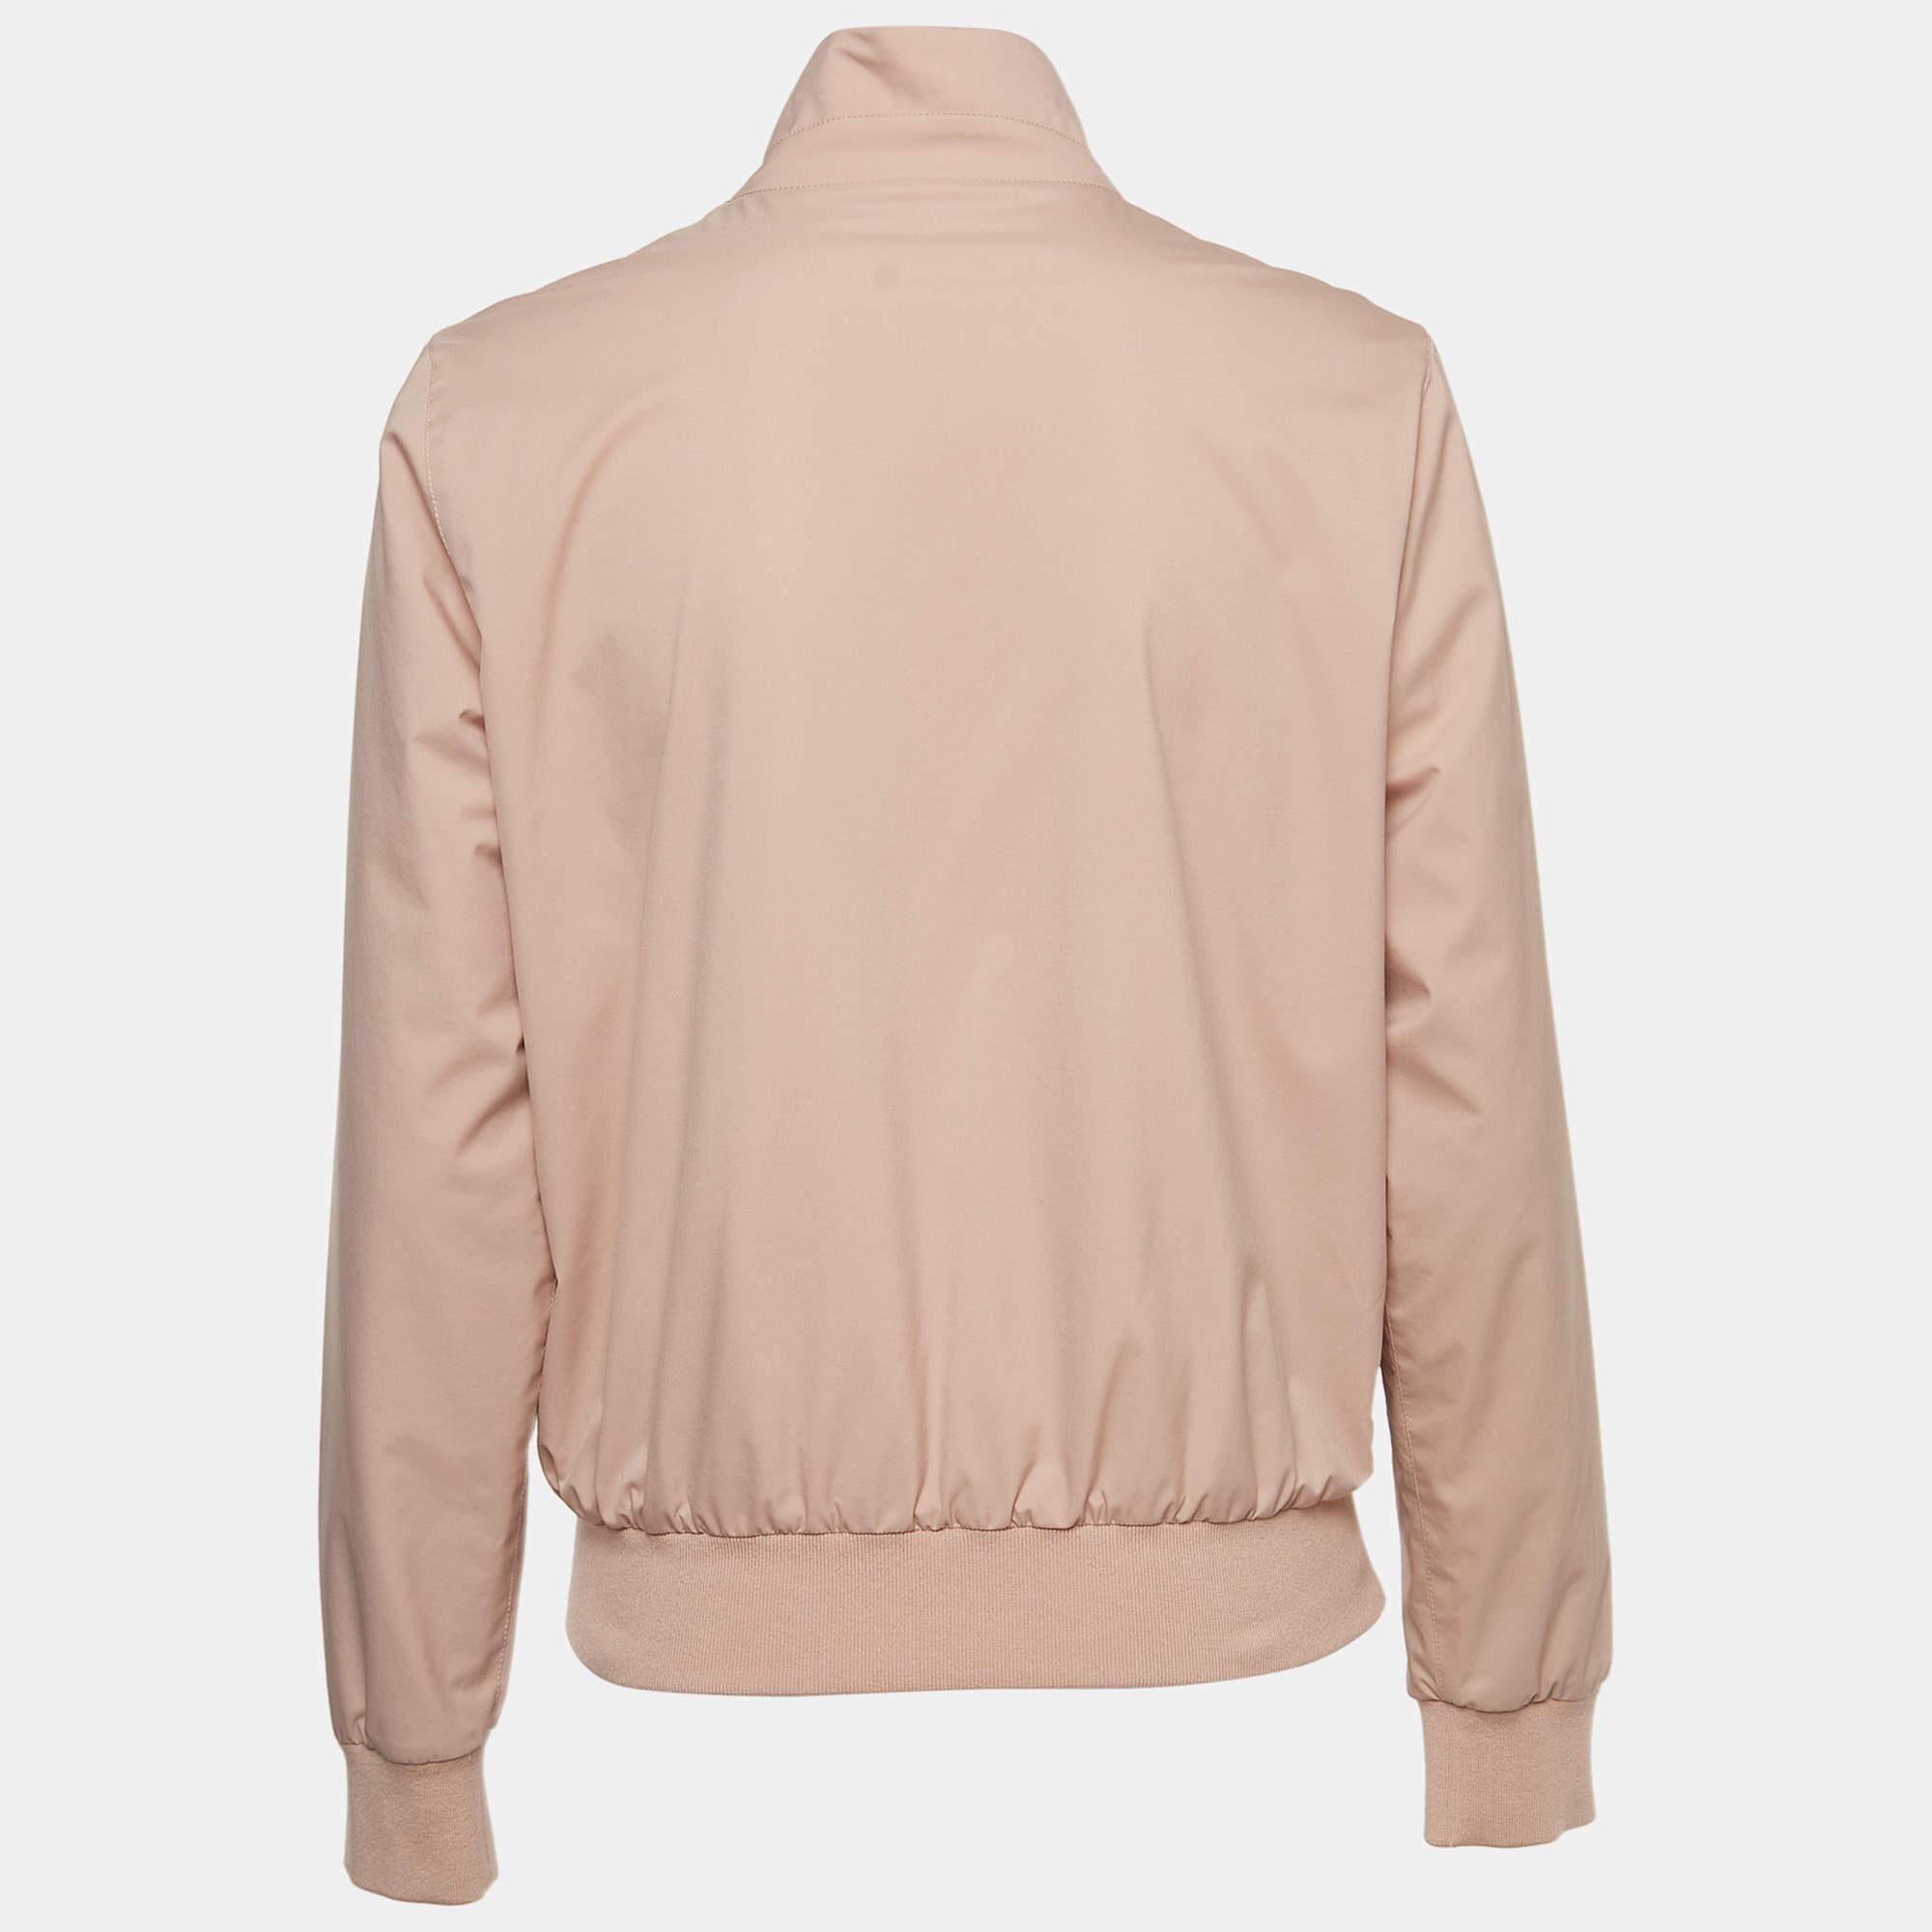 This Loro Piana pink jacket offers the satisfaction of a comfortable fit and refined style. It is made of quality fabrics and designed with a front zipper, two pockets, and long sleeves.

Includes: Info Booklet

